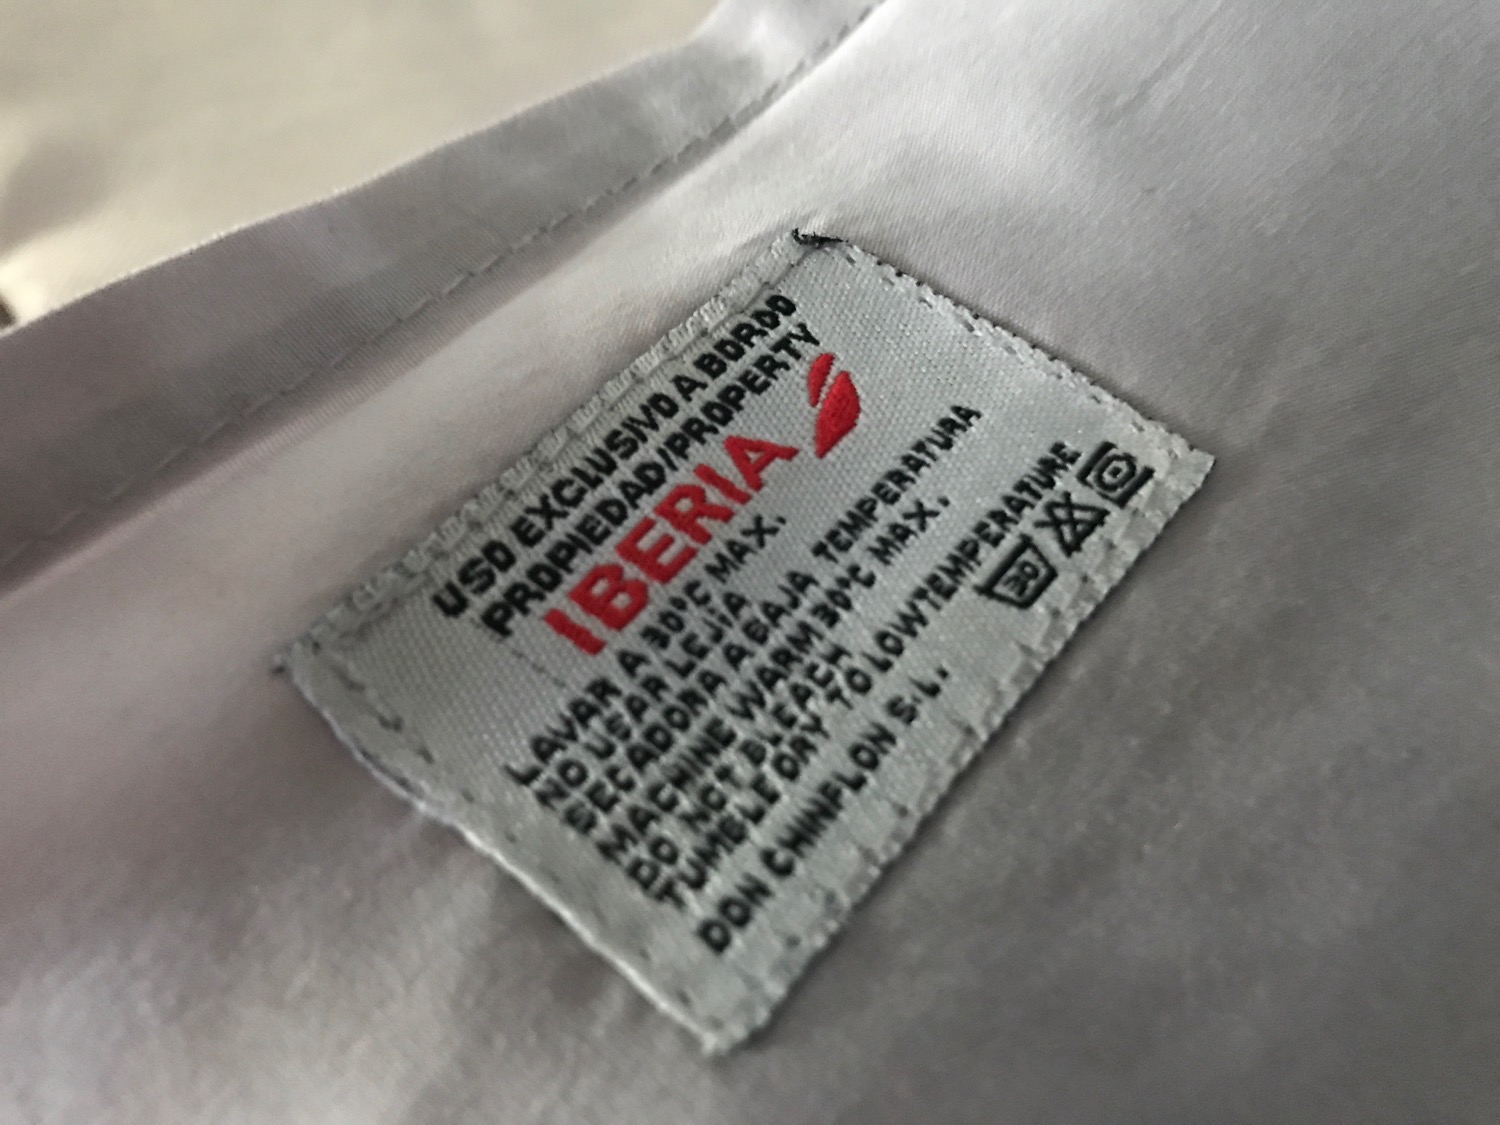 a label on a shirt